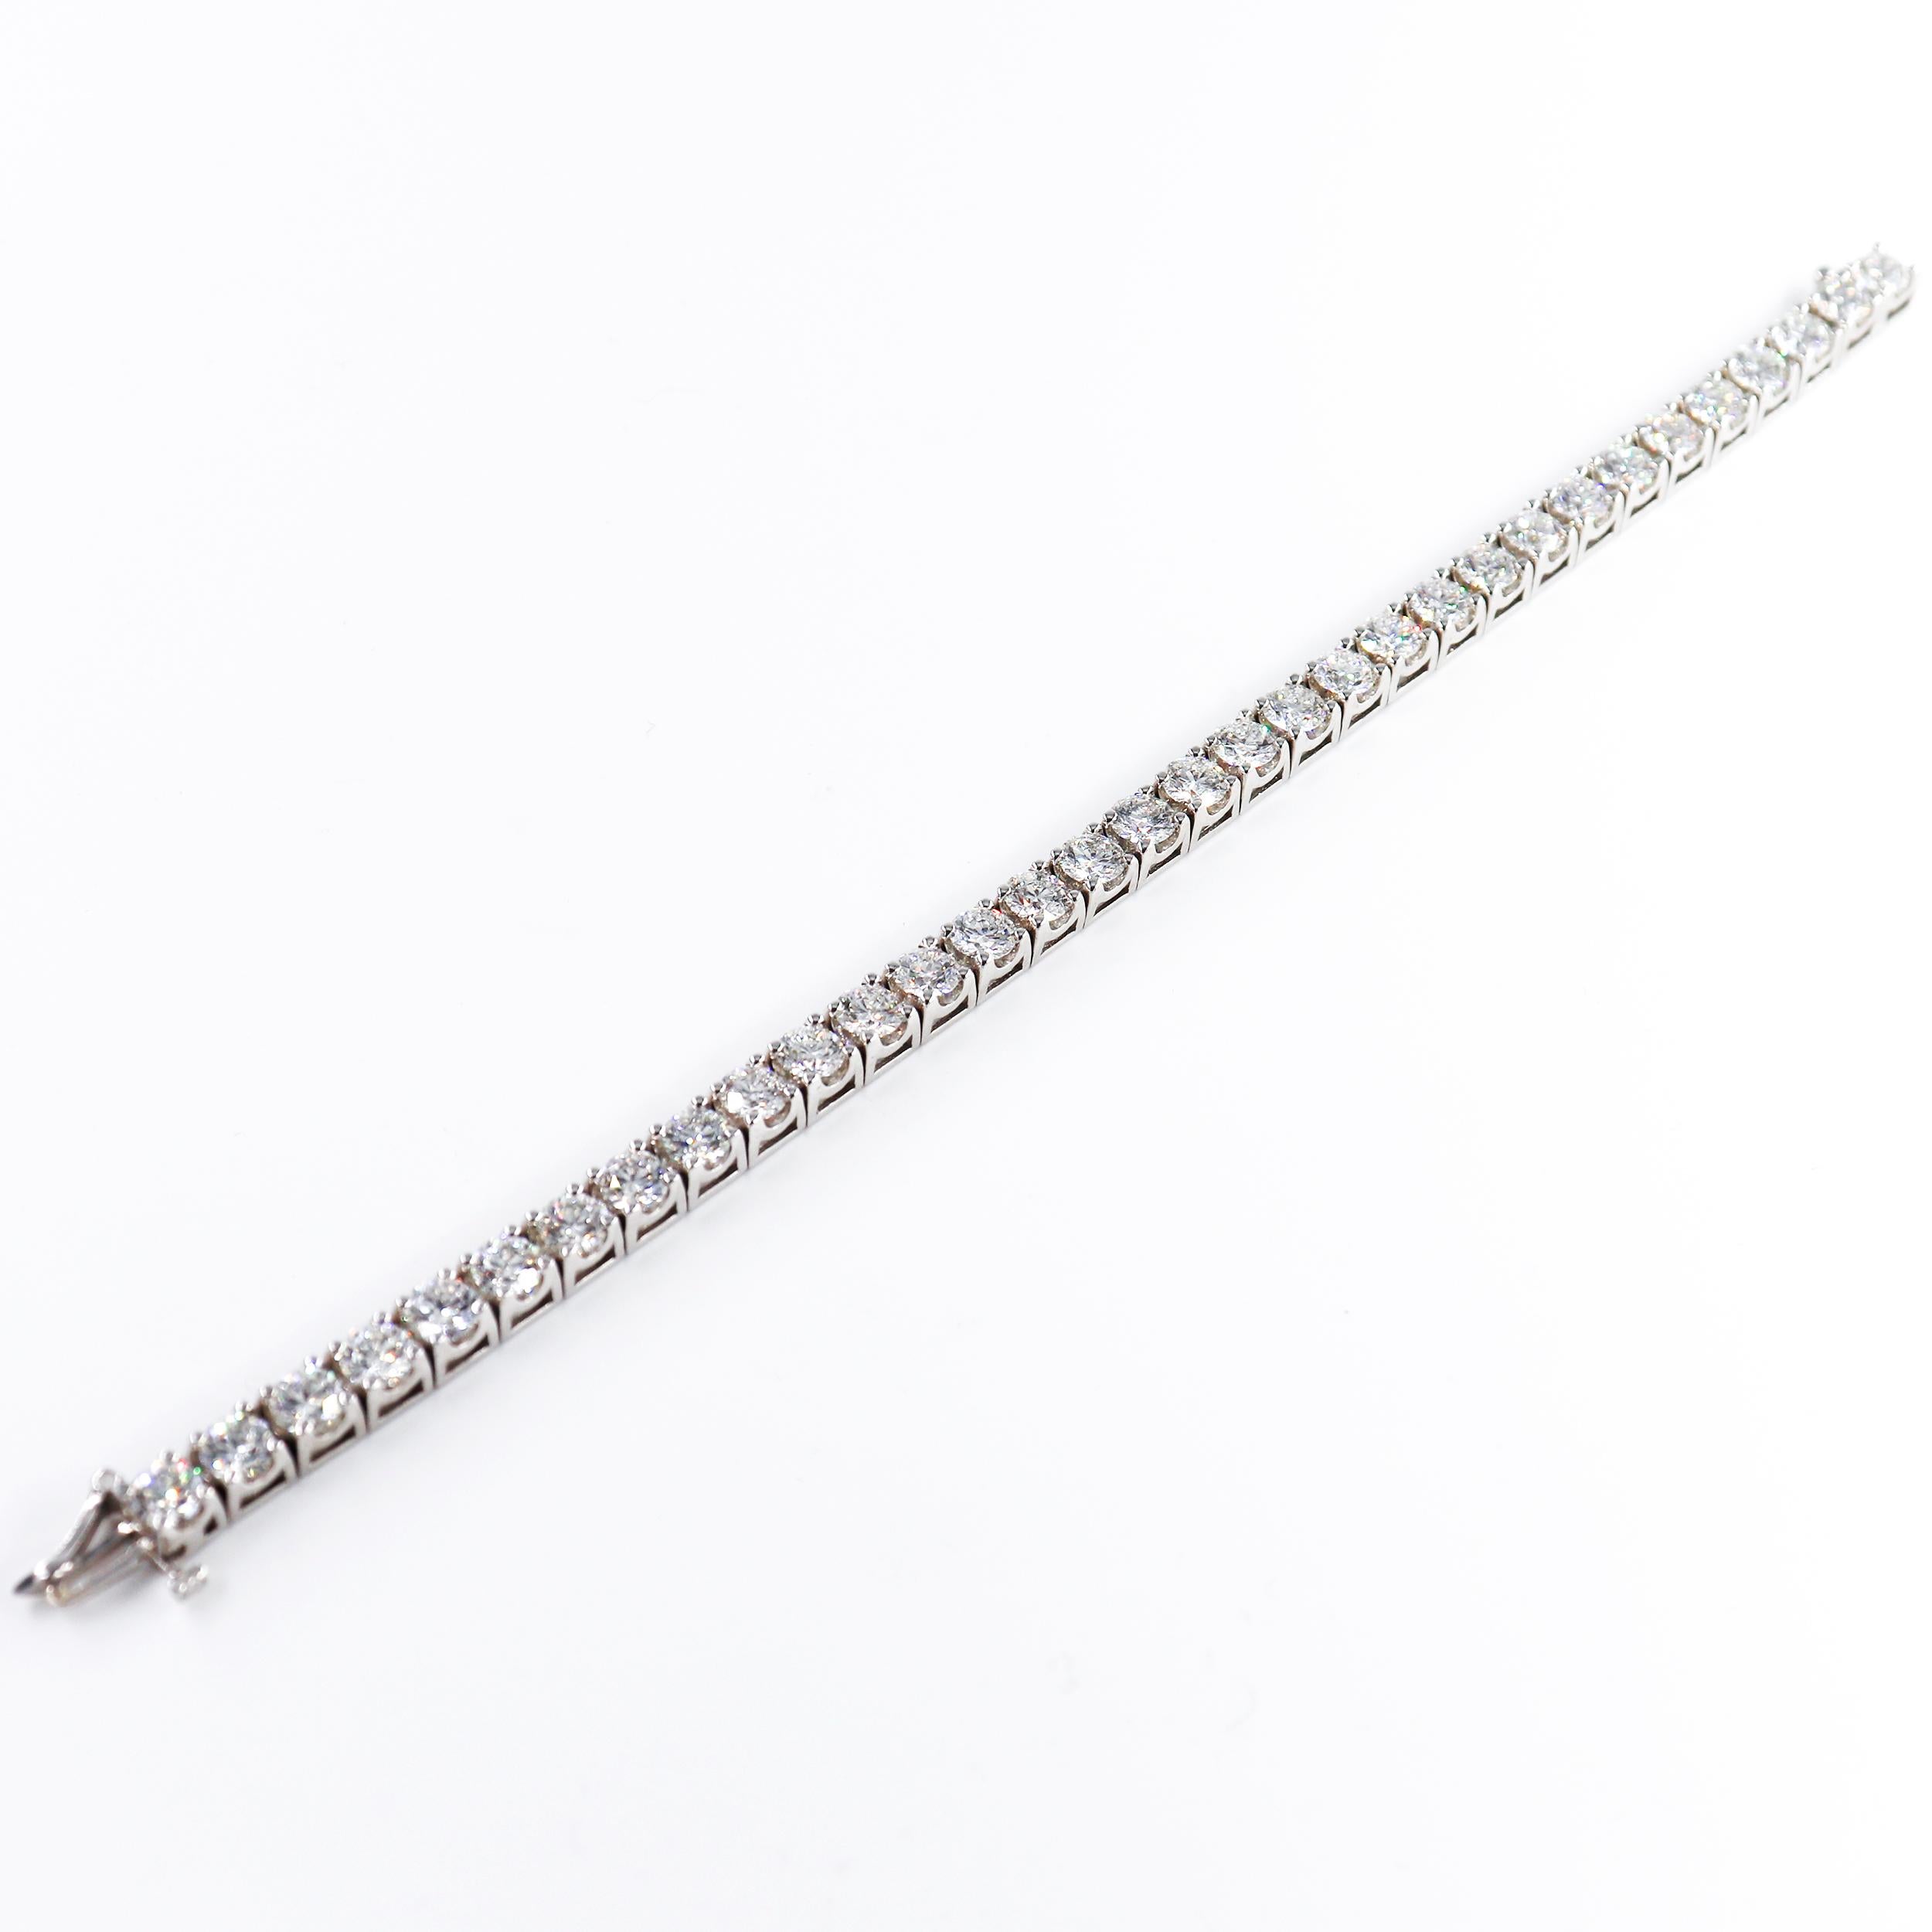 This J. Birnbach tennis bracelet crafted in 18 karat white gold features 33 round brilliant diamonds for a total weight of 13.71 carat with F/G color and SI clarity. 

This bracelet is 7 inches in length and is stamped '18K' 

Type: Tennis Bracelet